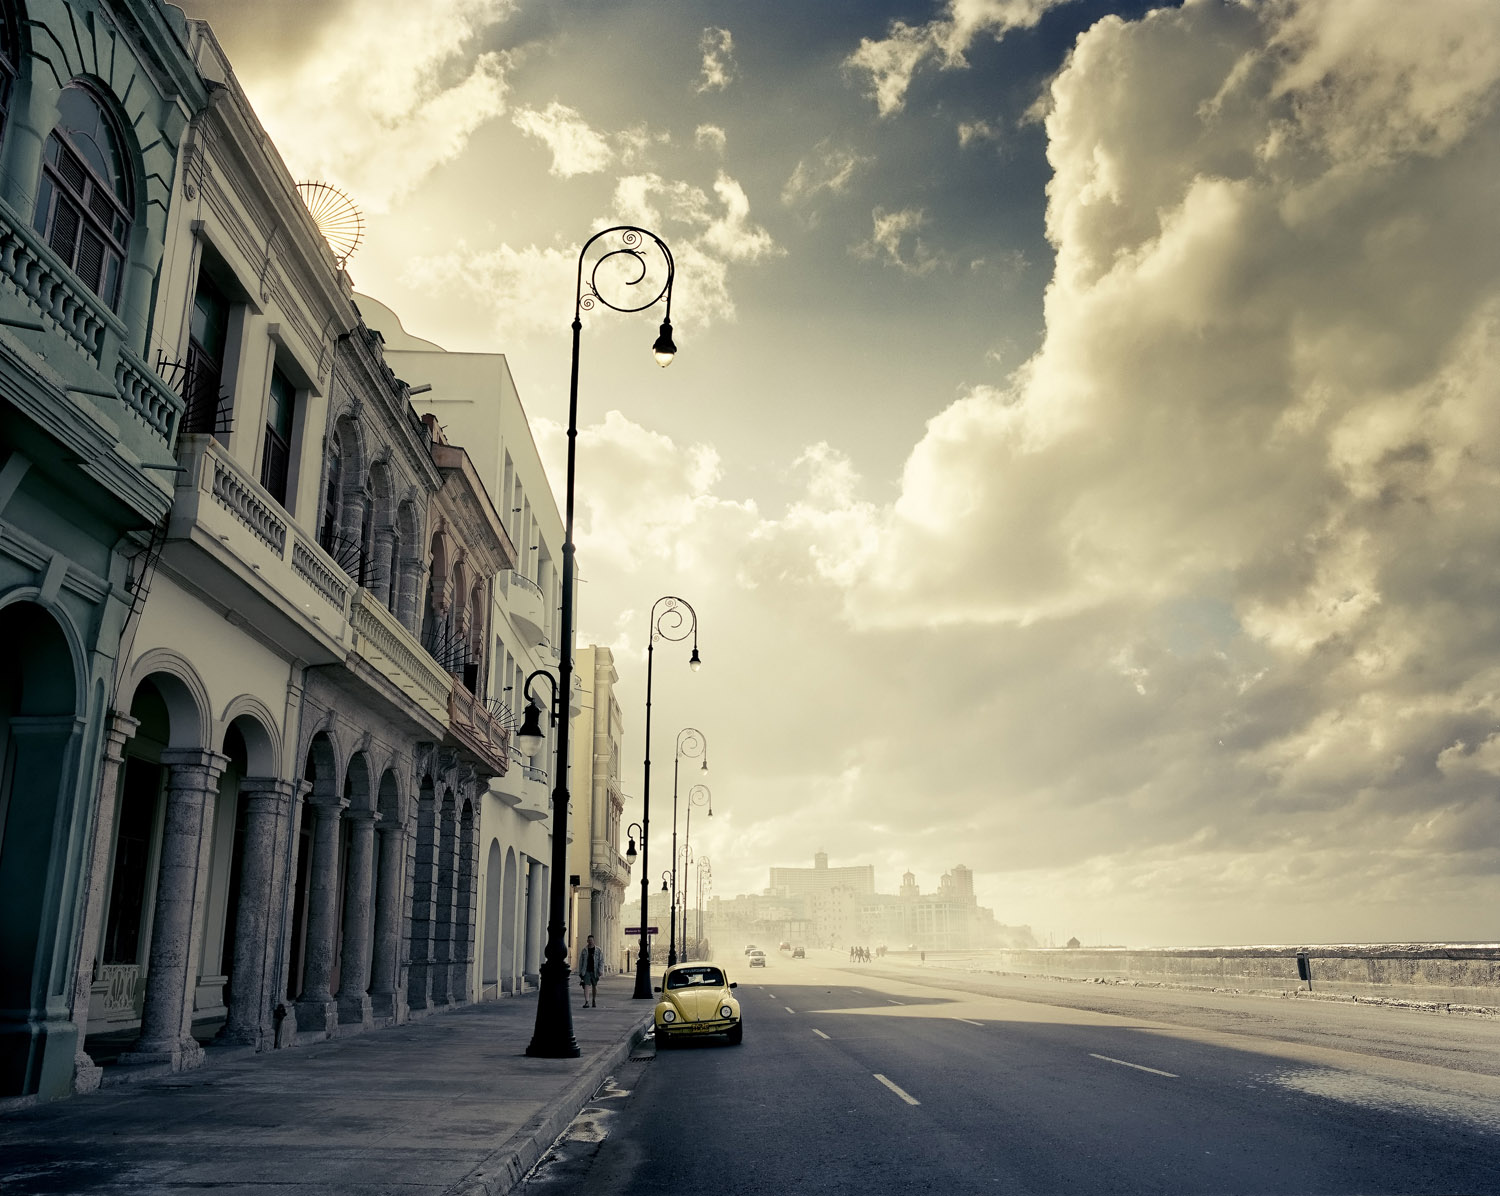 Havana’s most famous street, the Malecon at6 PM the day the cold front arrives and the sea gets choppy, and waves spray passing cars and pedestrians